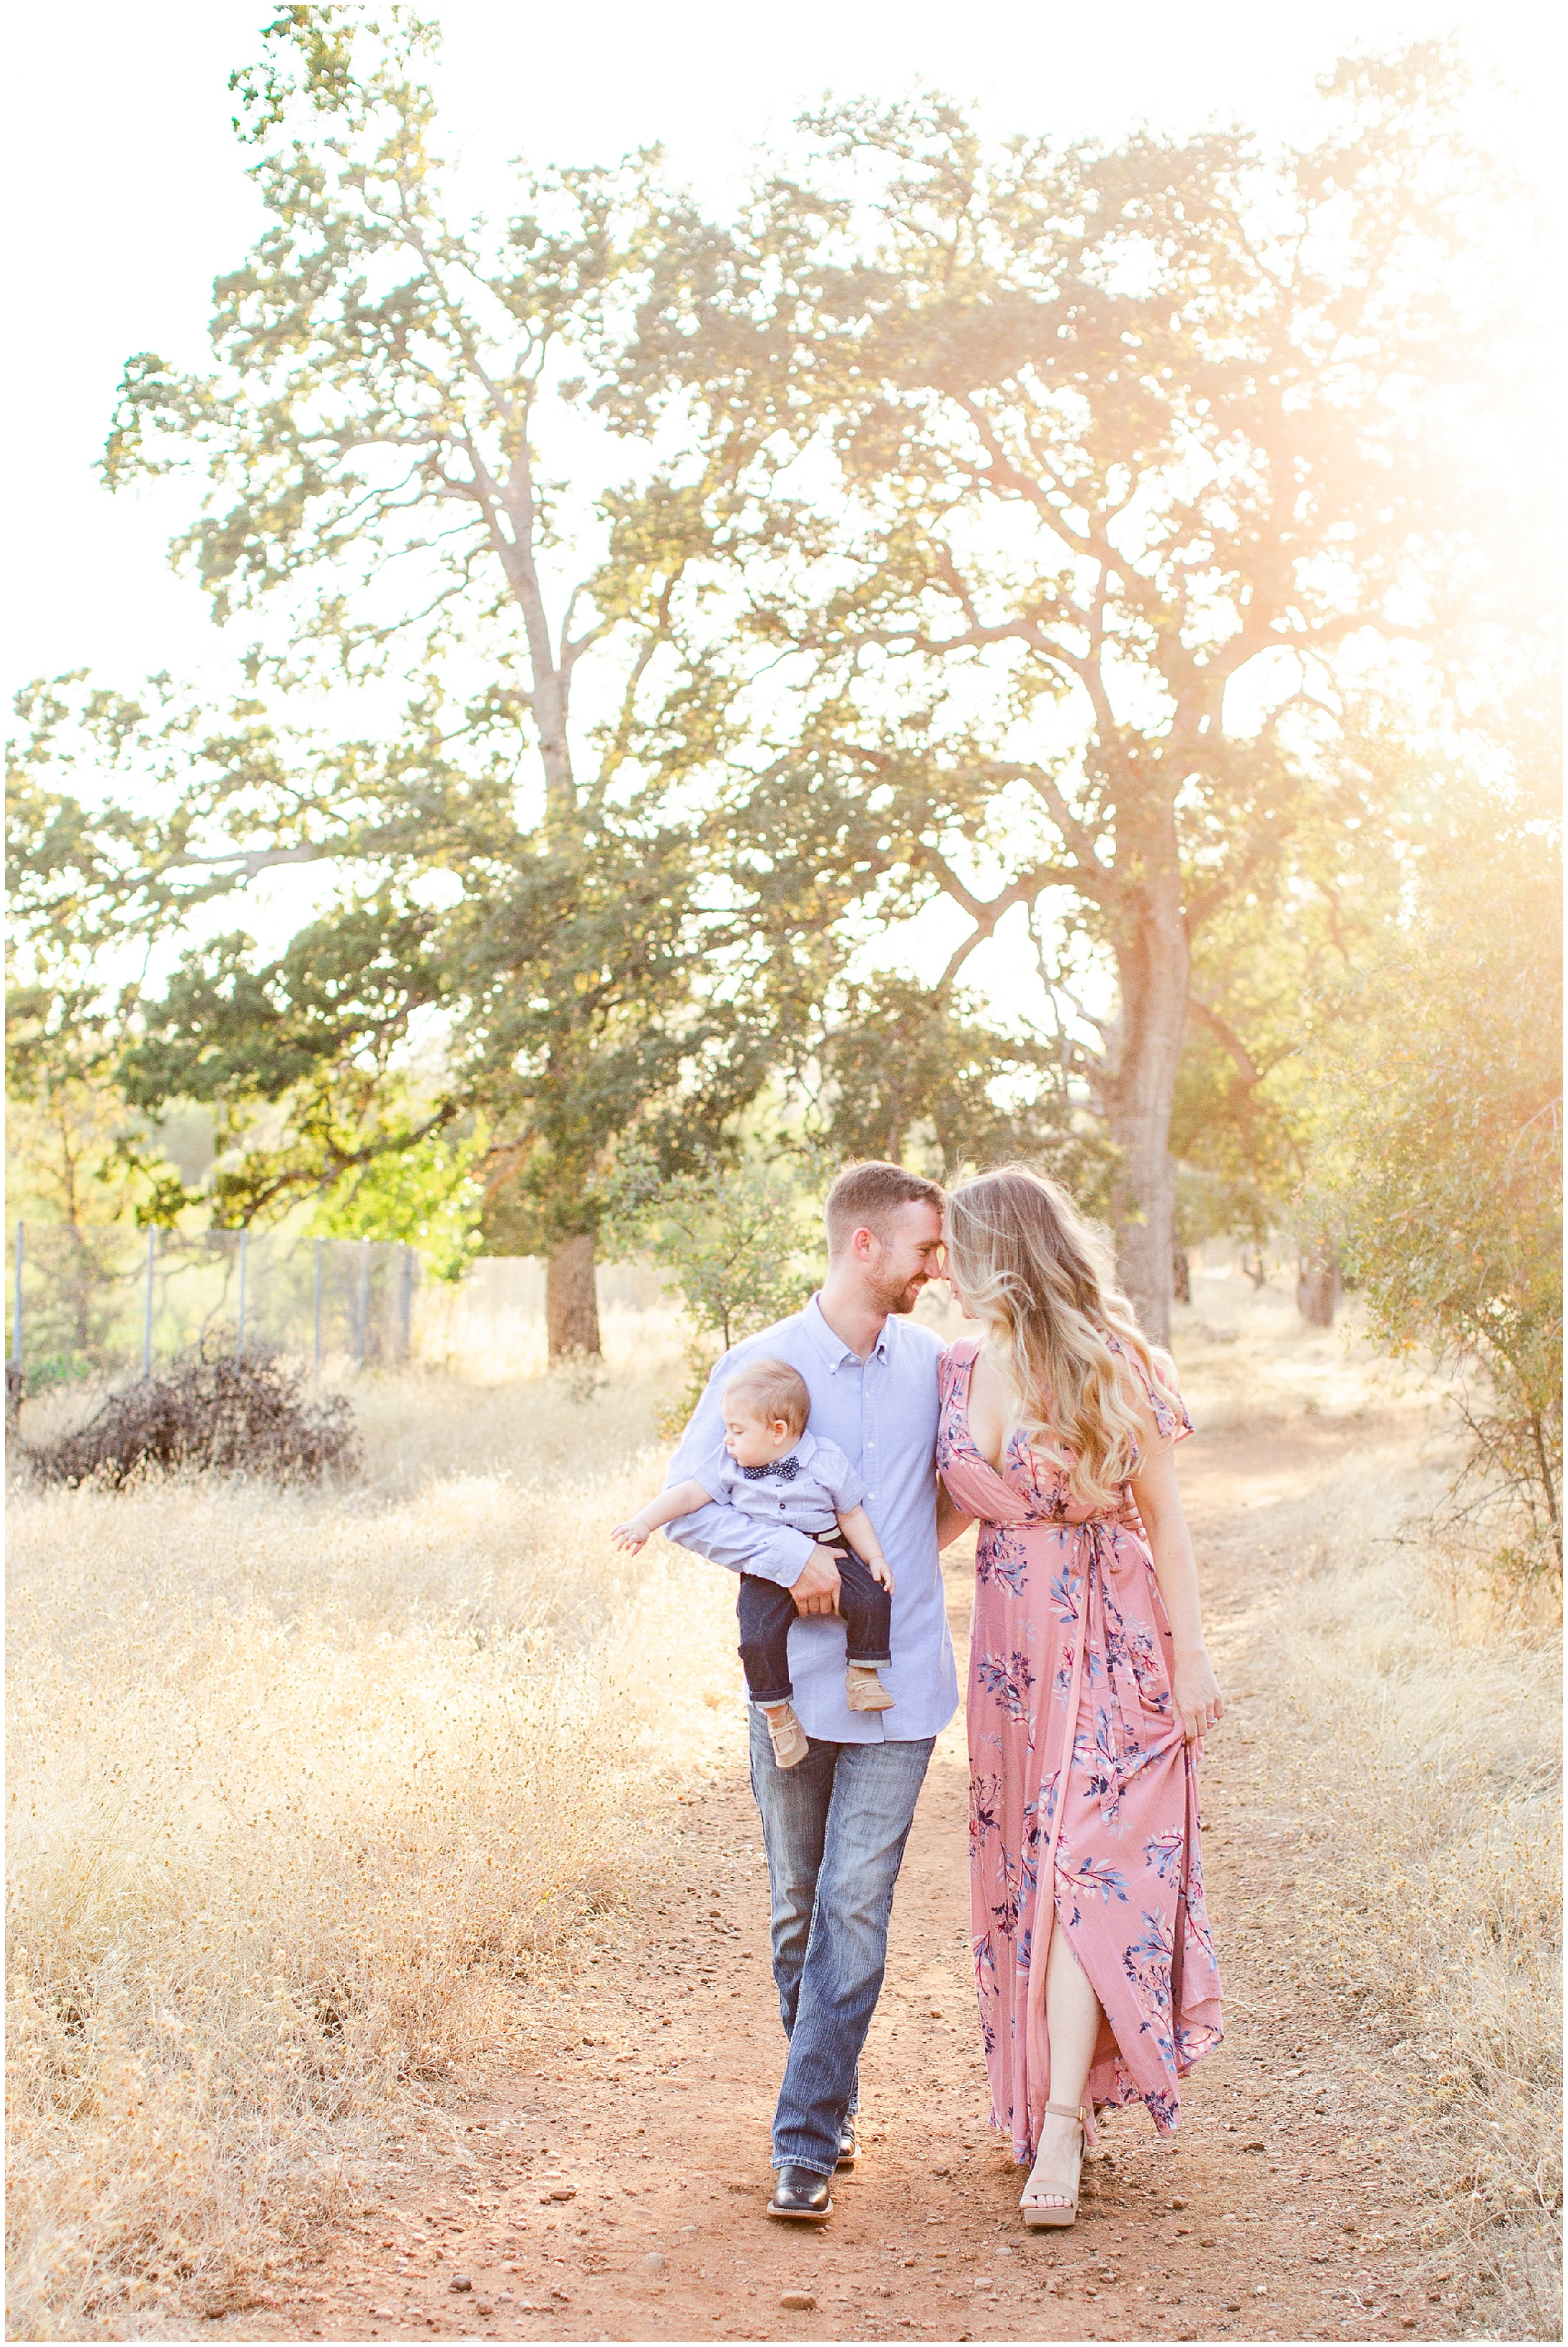 Fall Engagement Session with Son | Julie + Nate